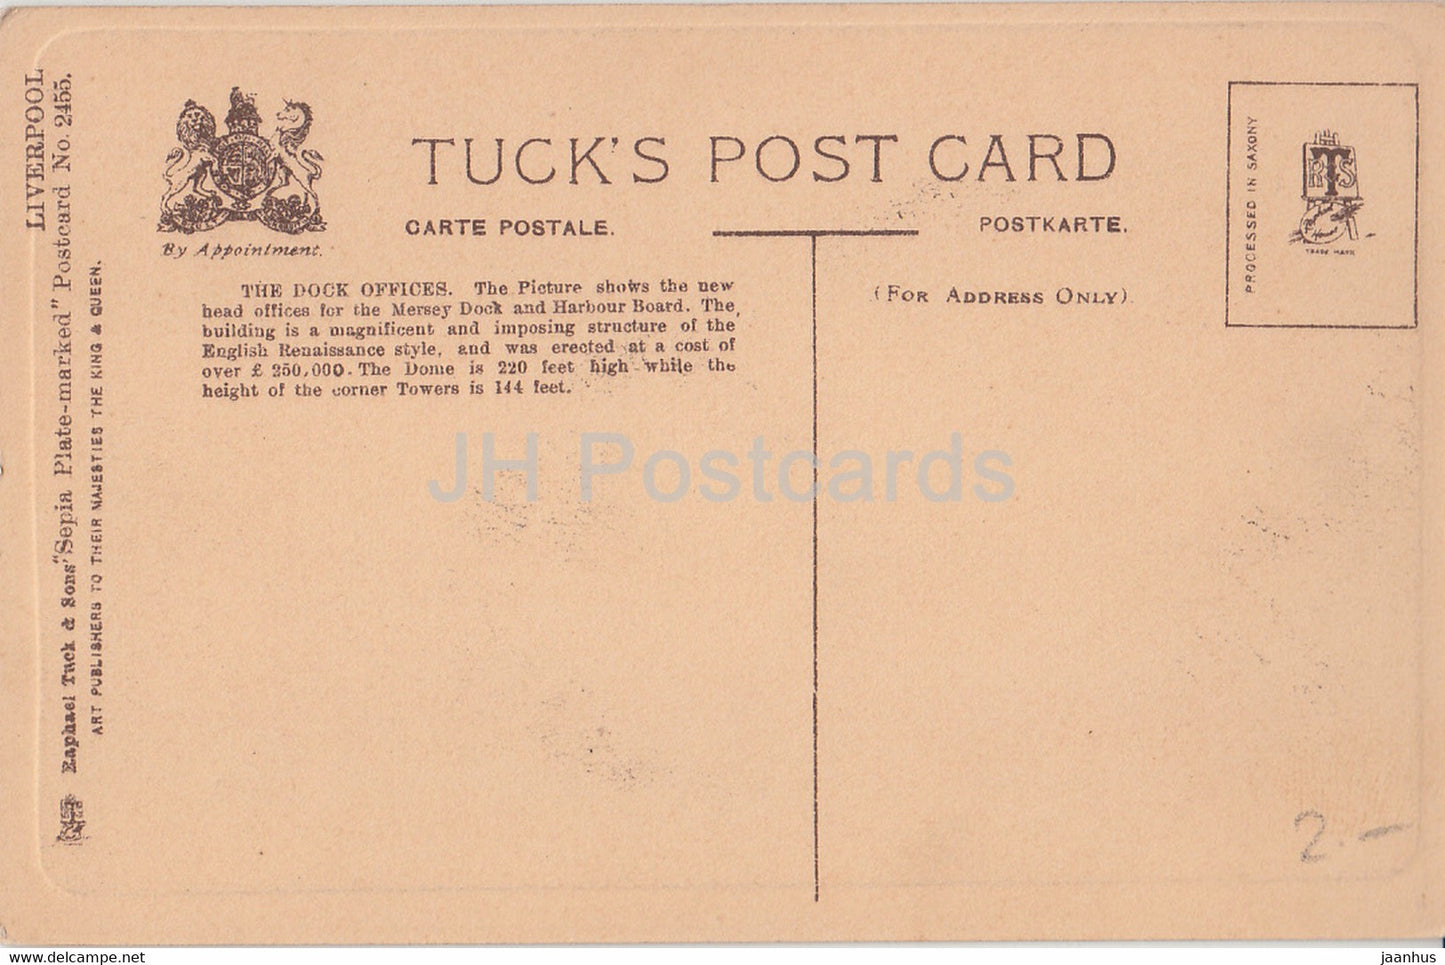 Liverpool - The Dock Offices - 2455 - carte postale ancienne - Angleterre - Royaume-Uni - inutilisée